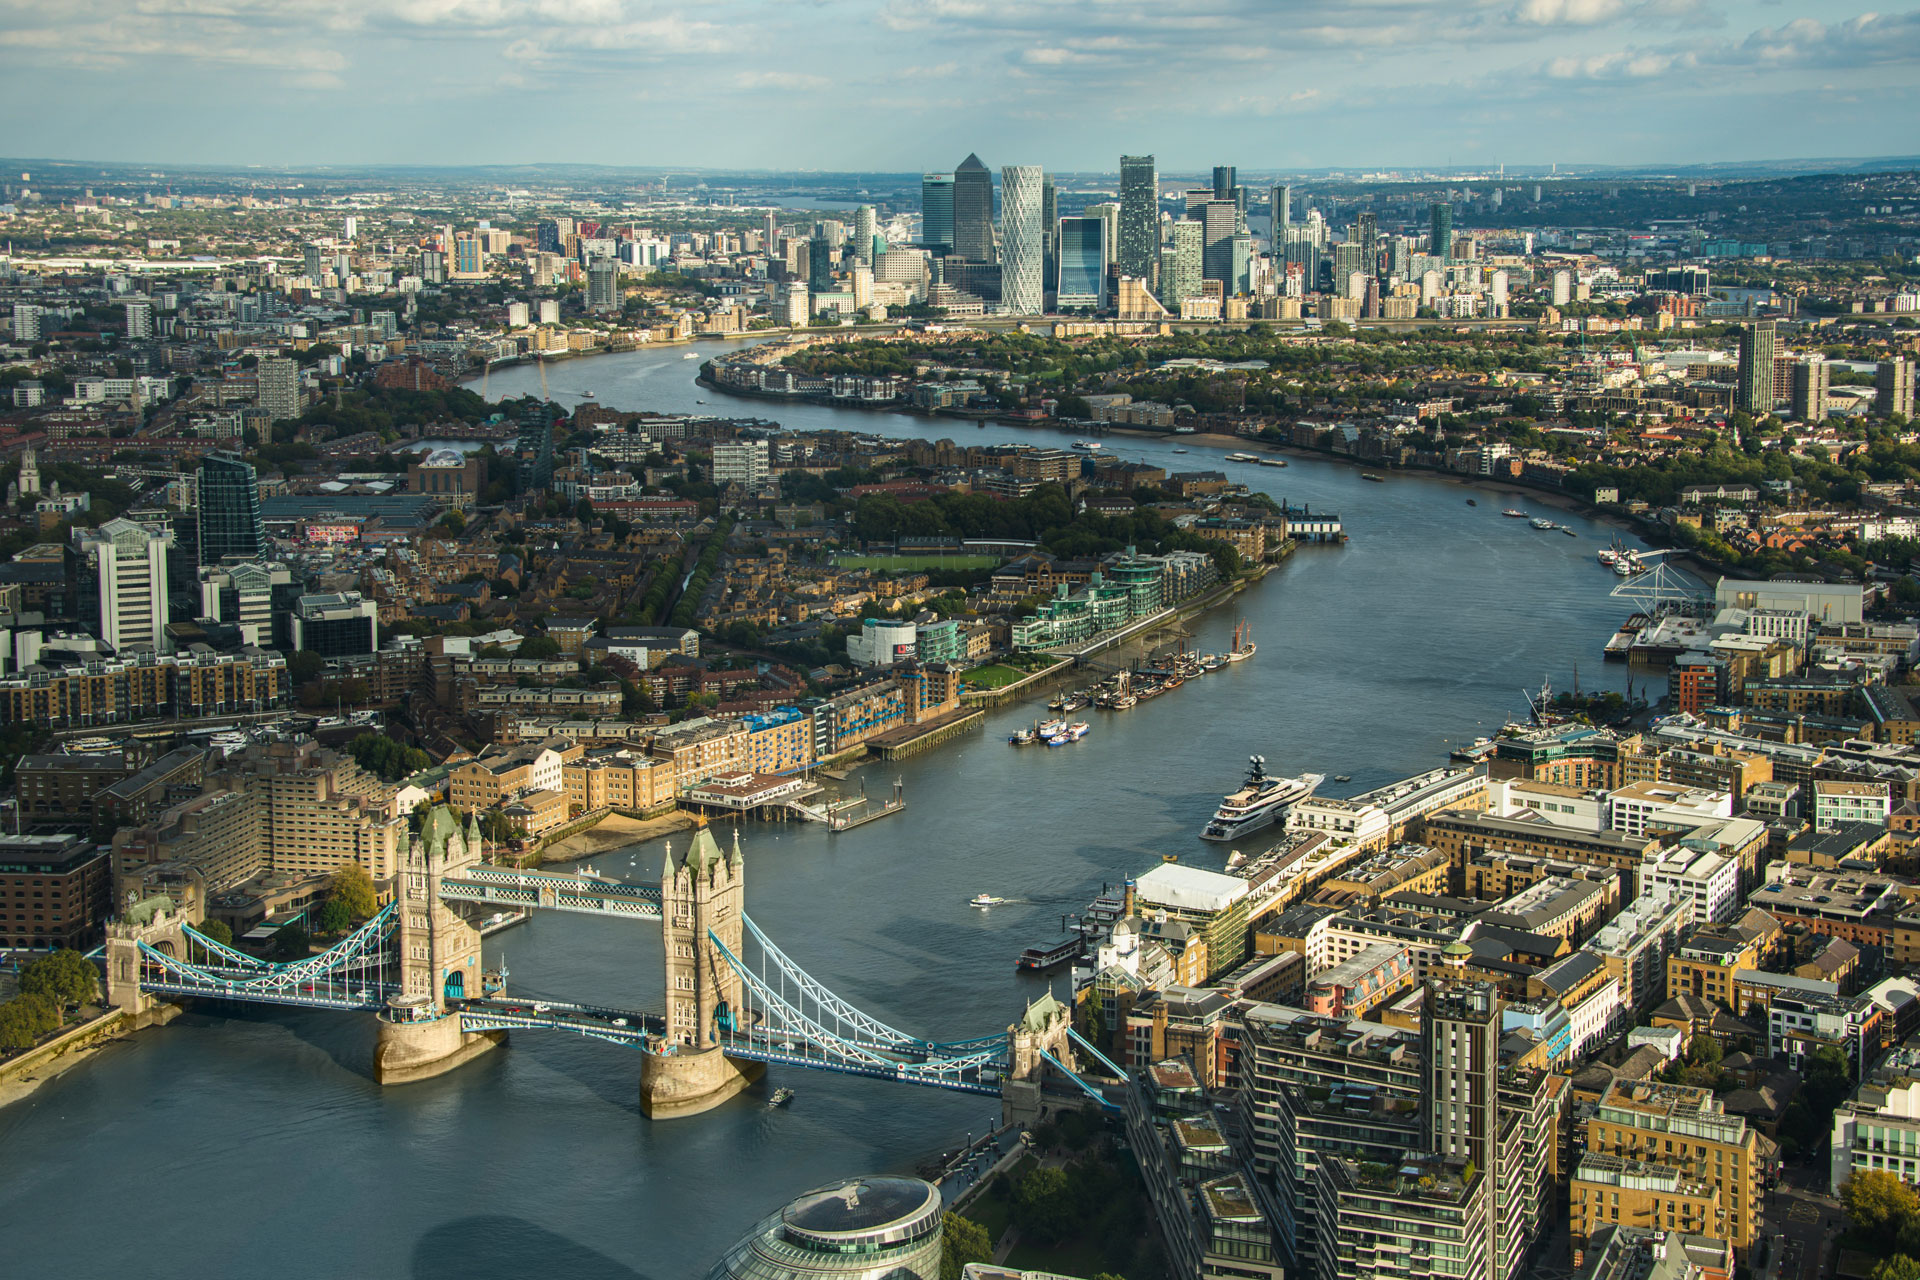 What Is A Sponge City – And Could London Become One?